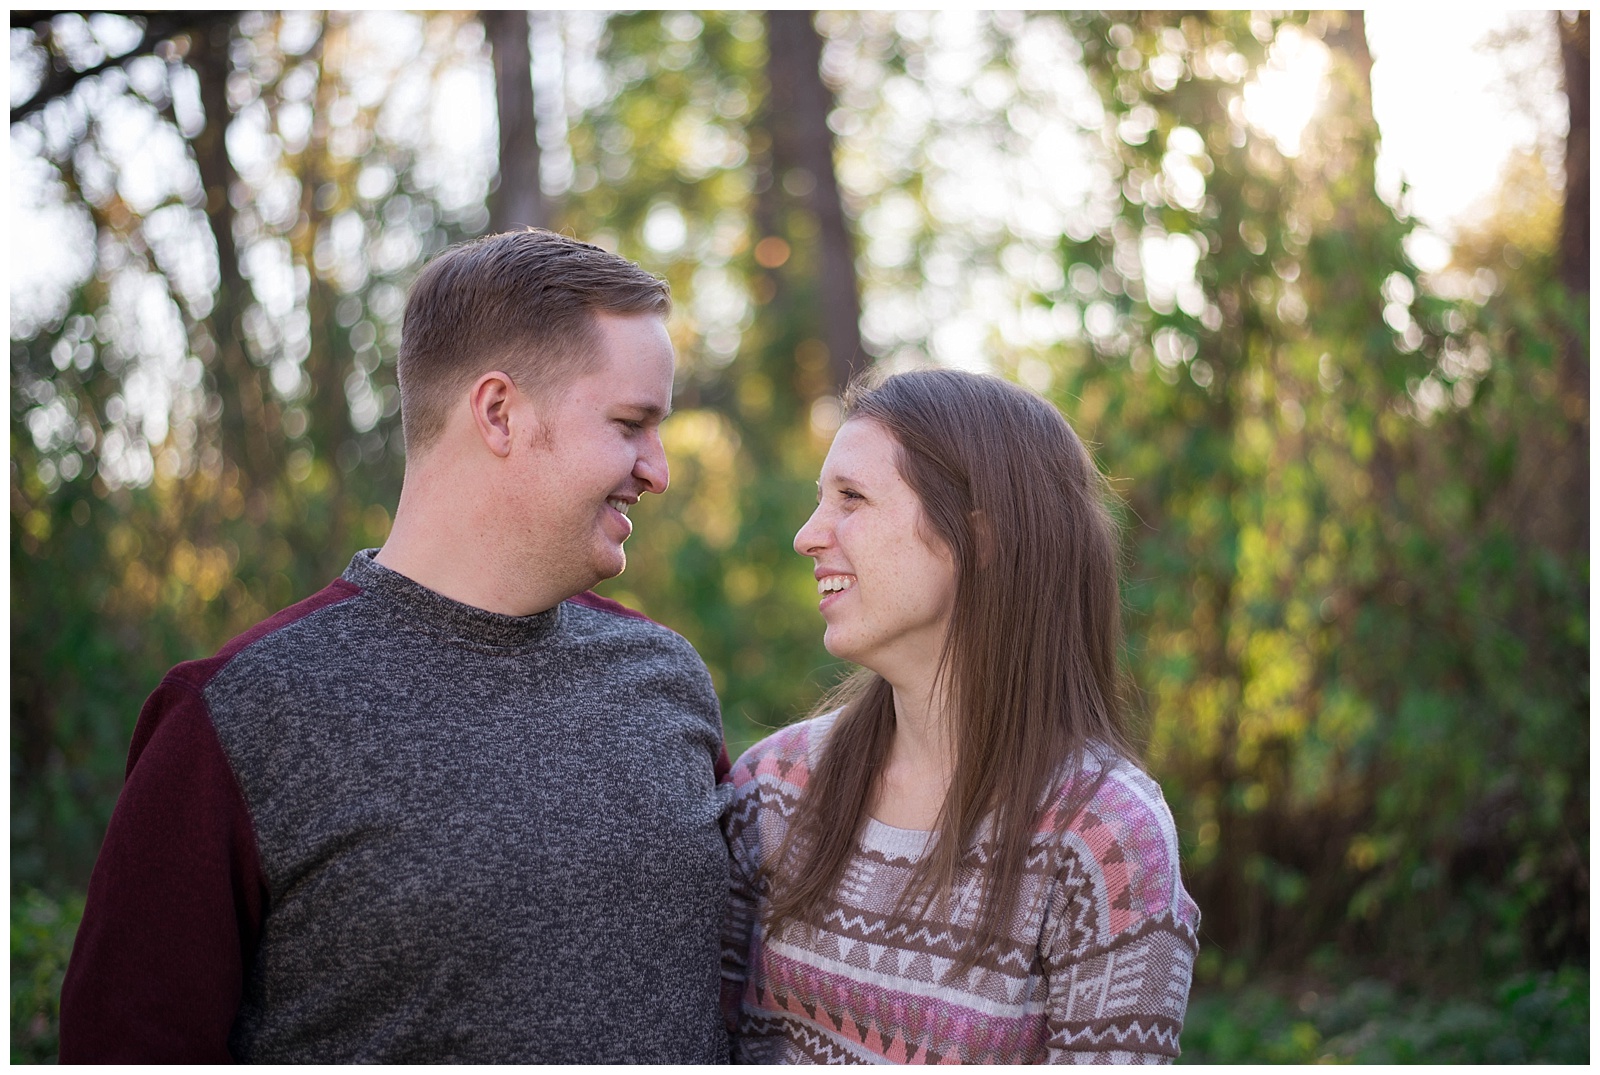 Fall Engagement Session | Monica Brown Photography, monicabrownphoto.com